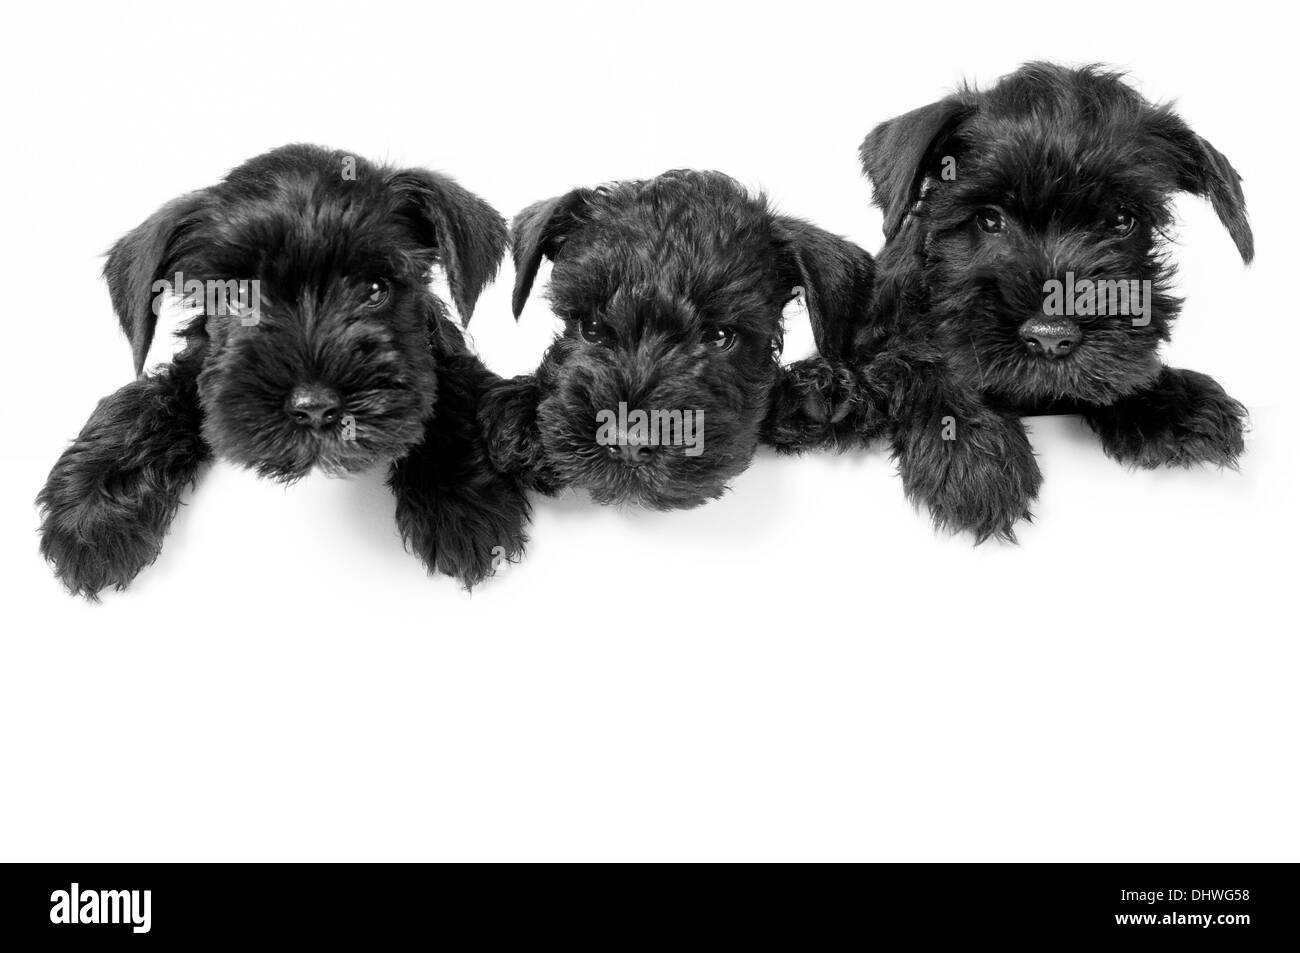 Three adorable schnauzer puppies on white background with room for your text Stock Photo